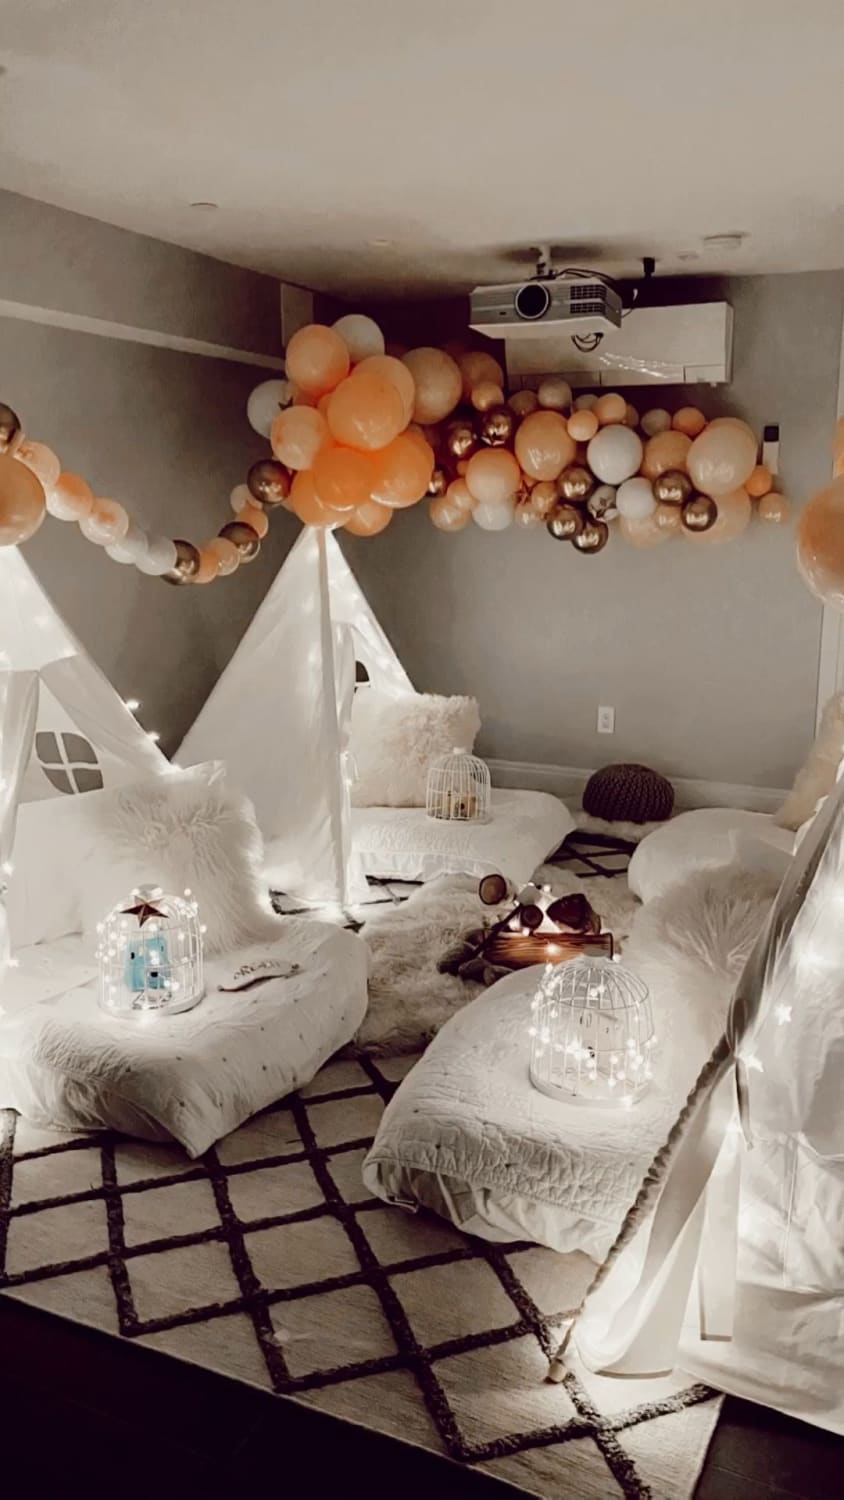 How to create a slumber party for kids